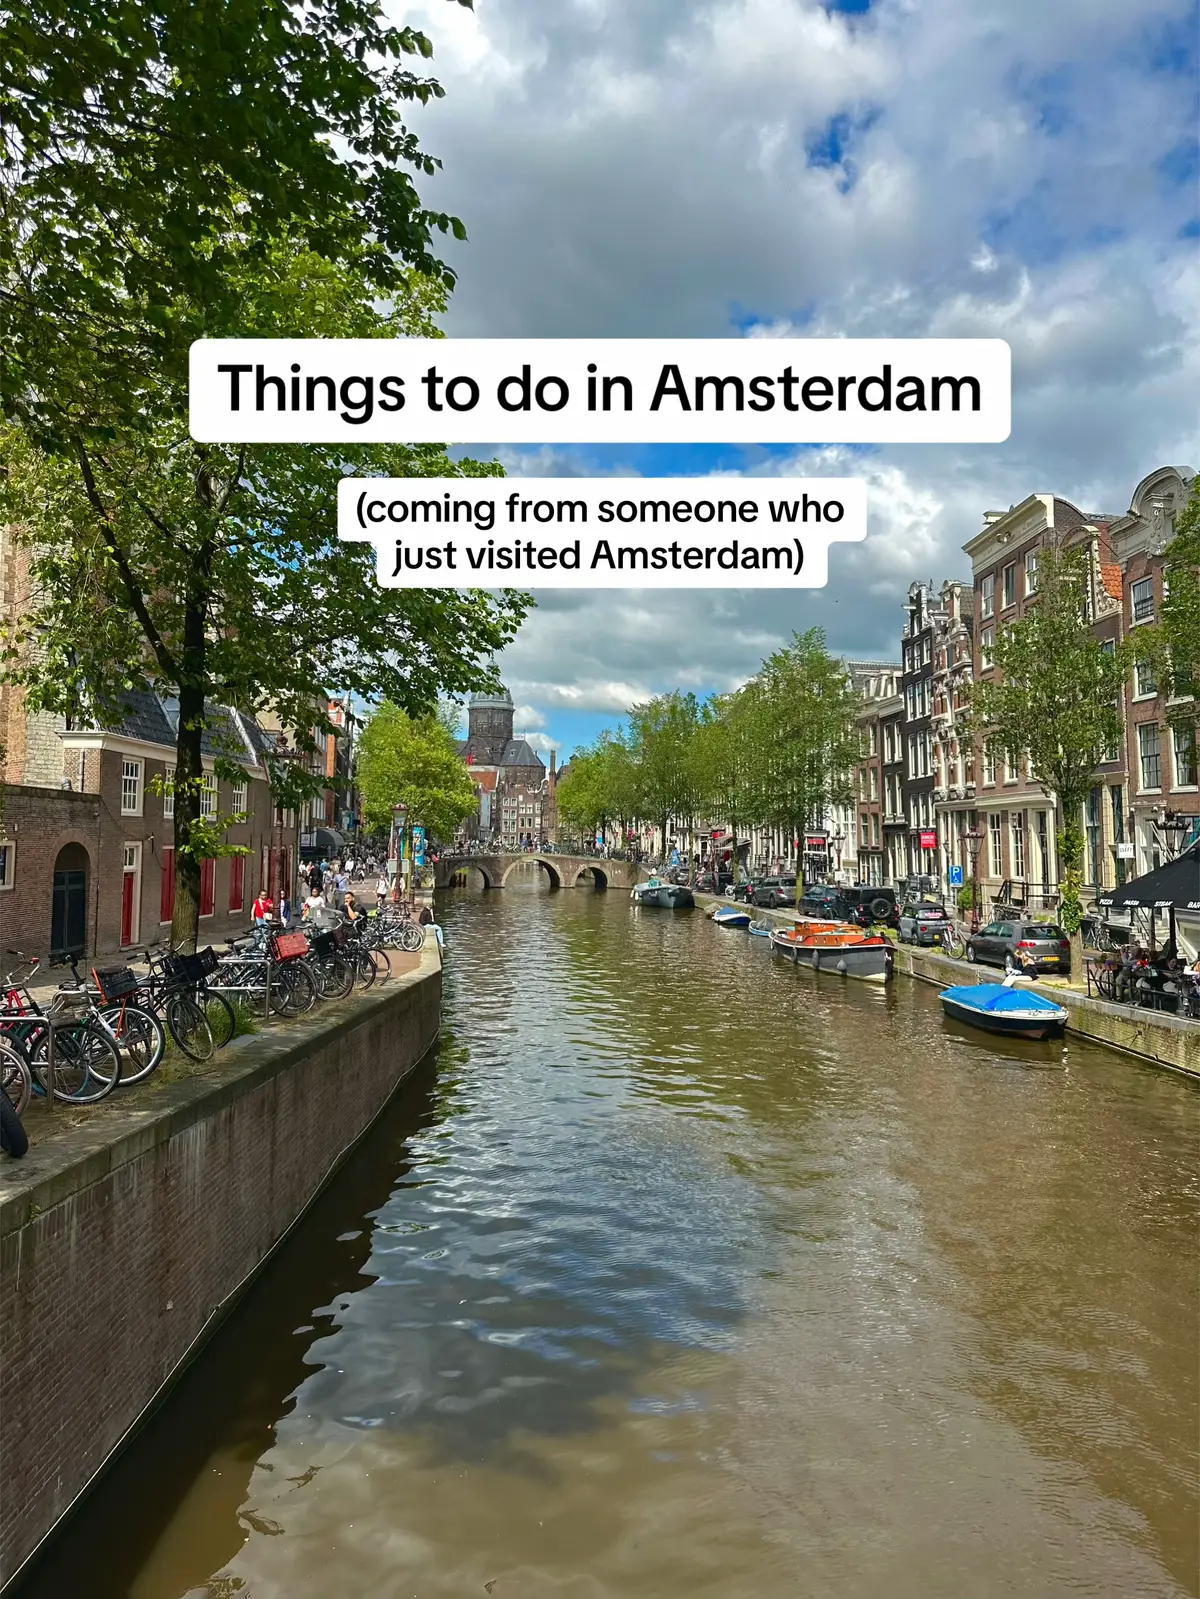 My list of things to do in Amsterdam if you’re planning on visiting #amsterdam #amsterdamcity #eurosummer #thingstodo #recommendations 